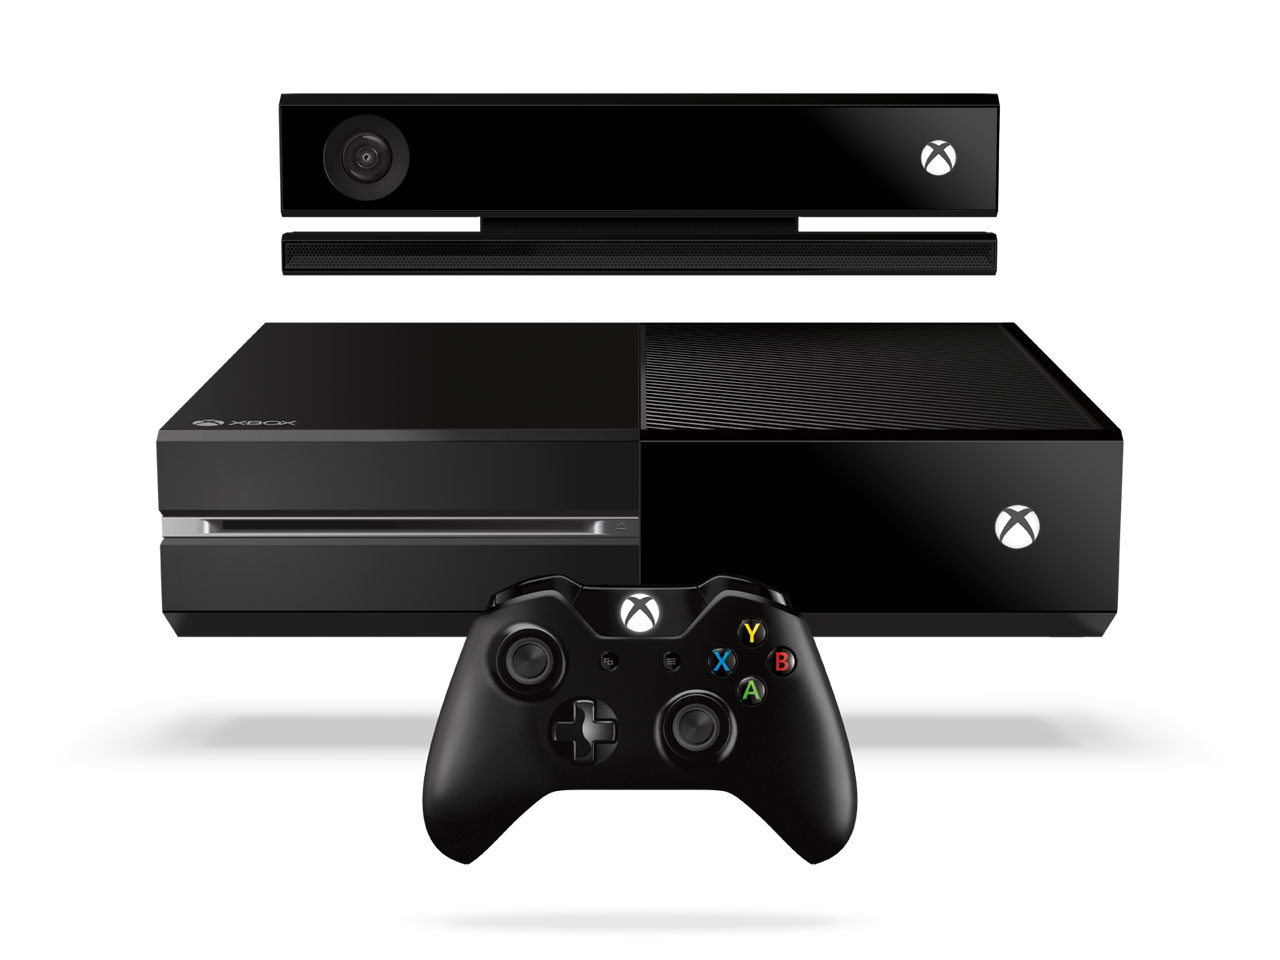 XBox-One-Controller-Kinect-Family-Produc